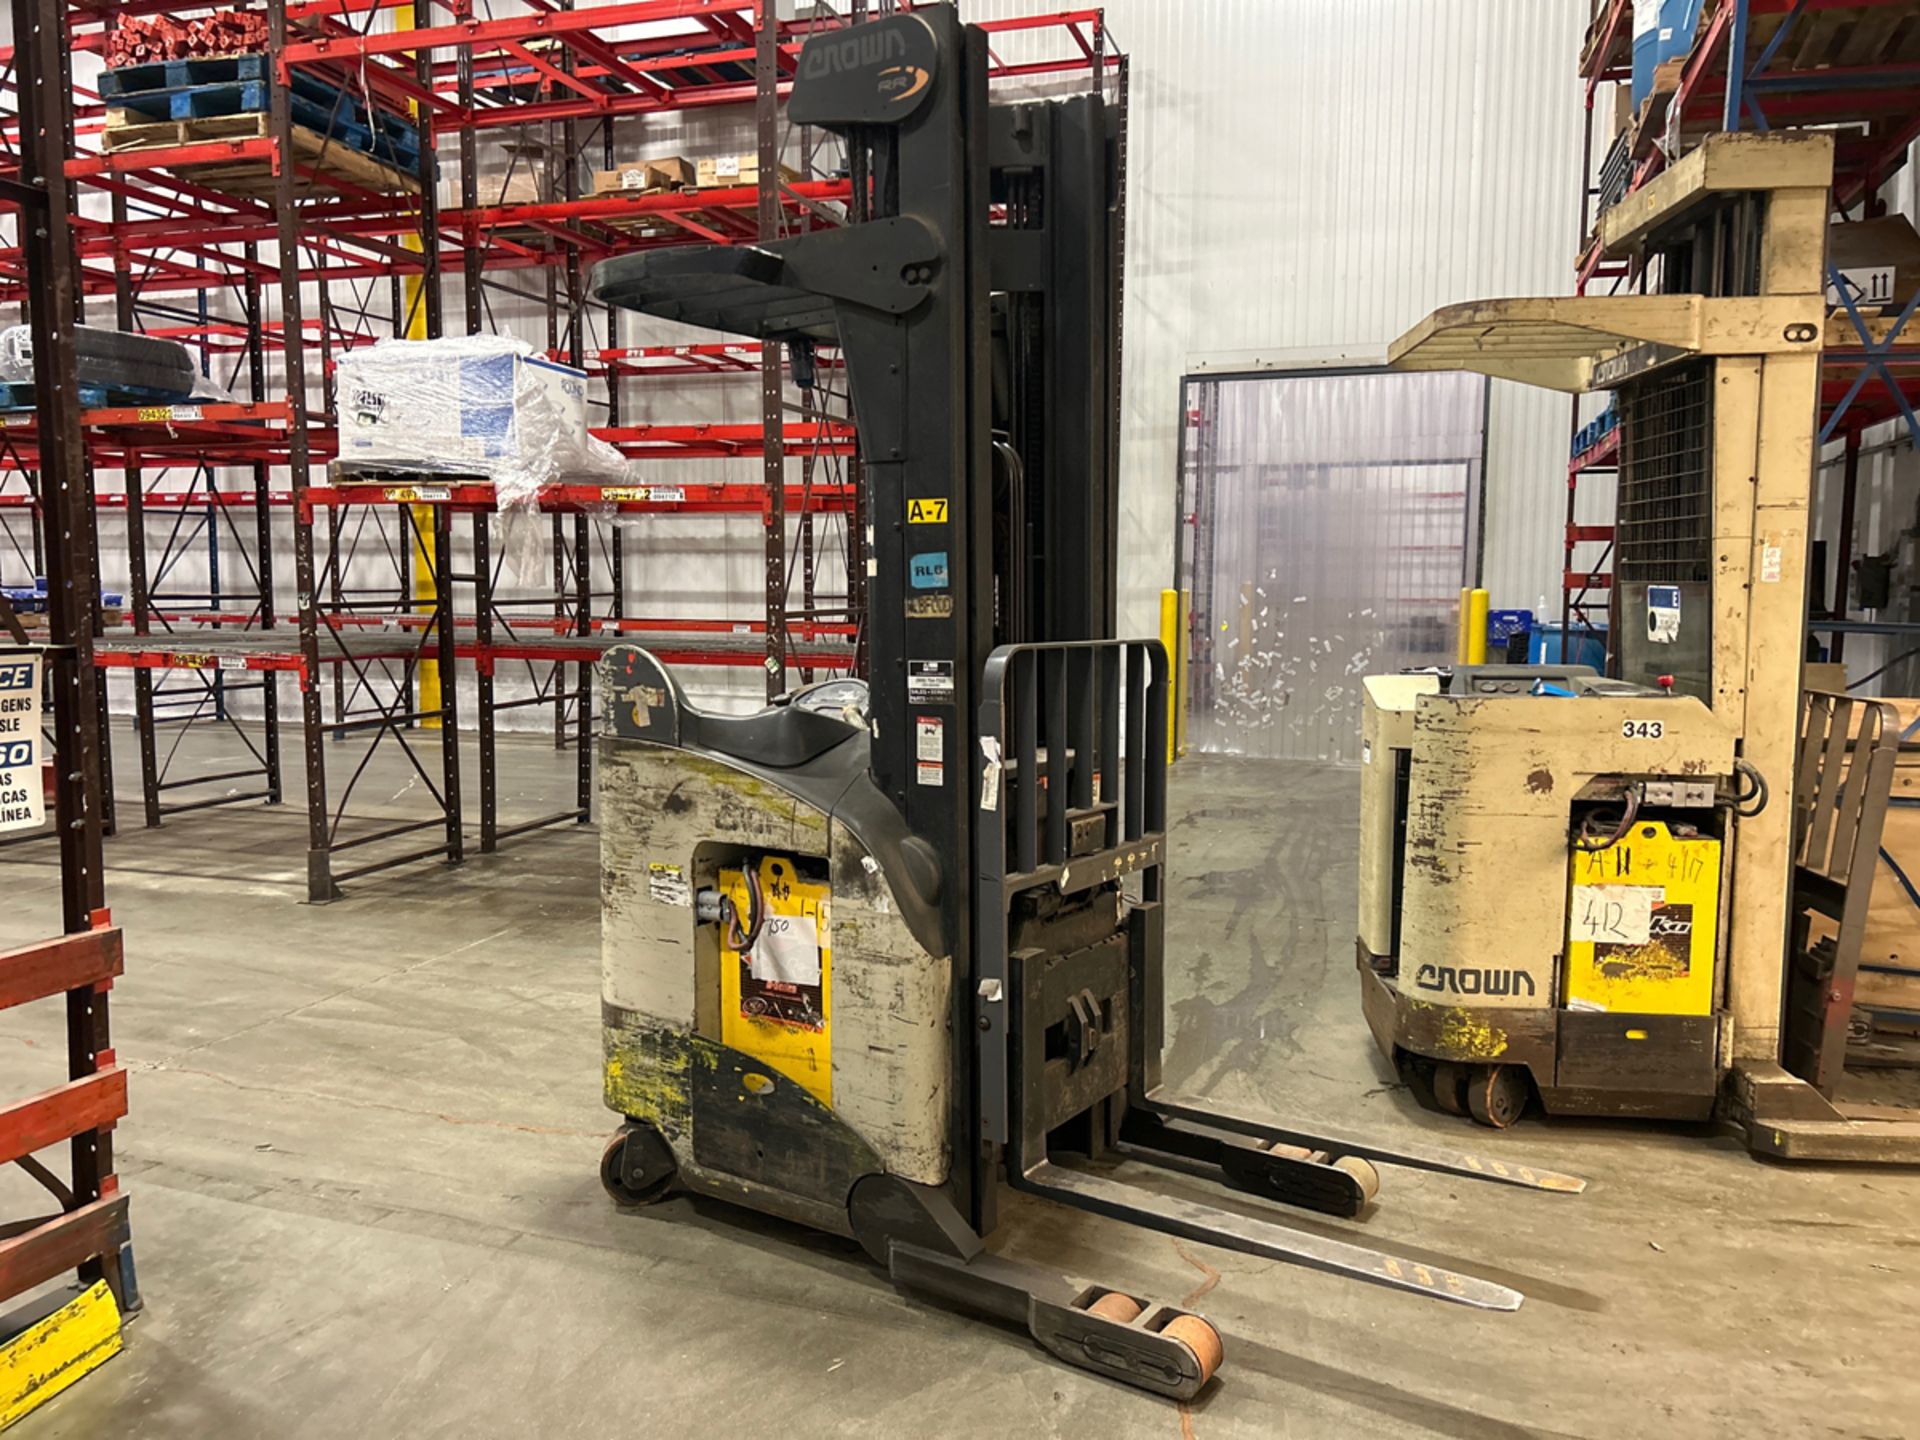 Crown RR5220-35 3,500lbs Electric 36V Reach Truck w/ Charger